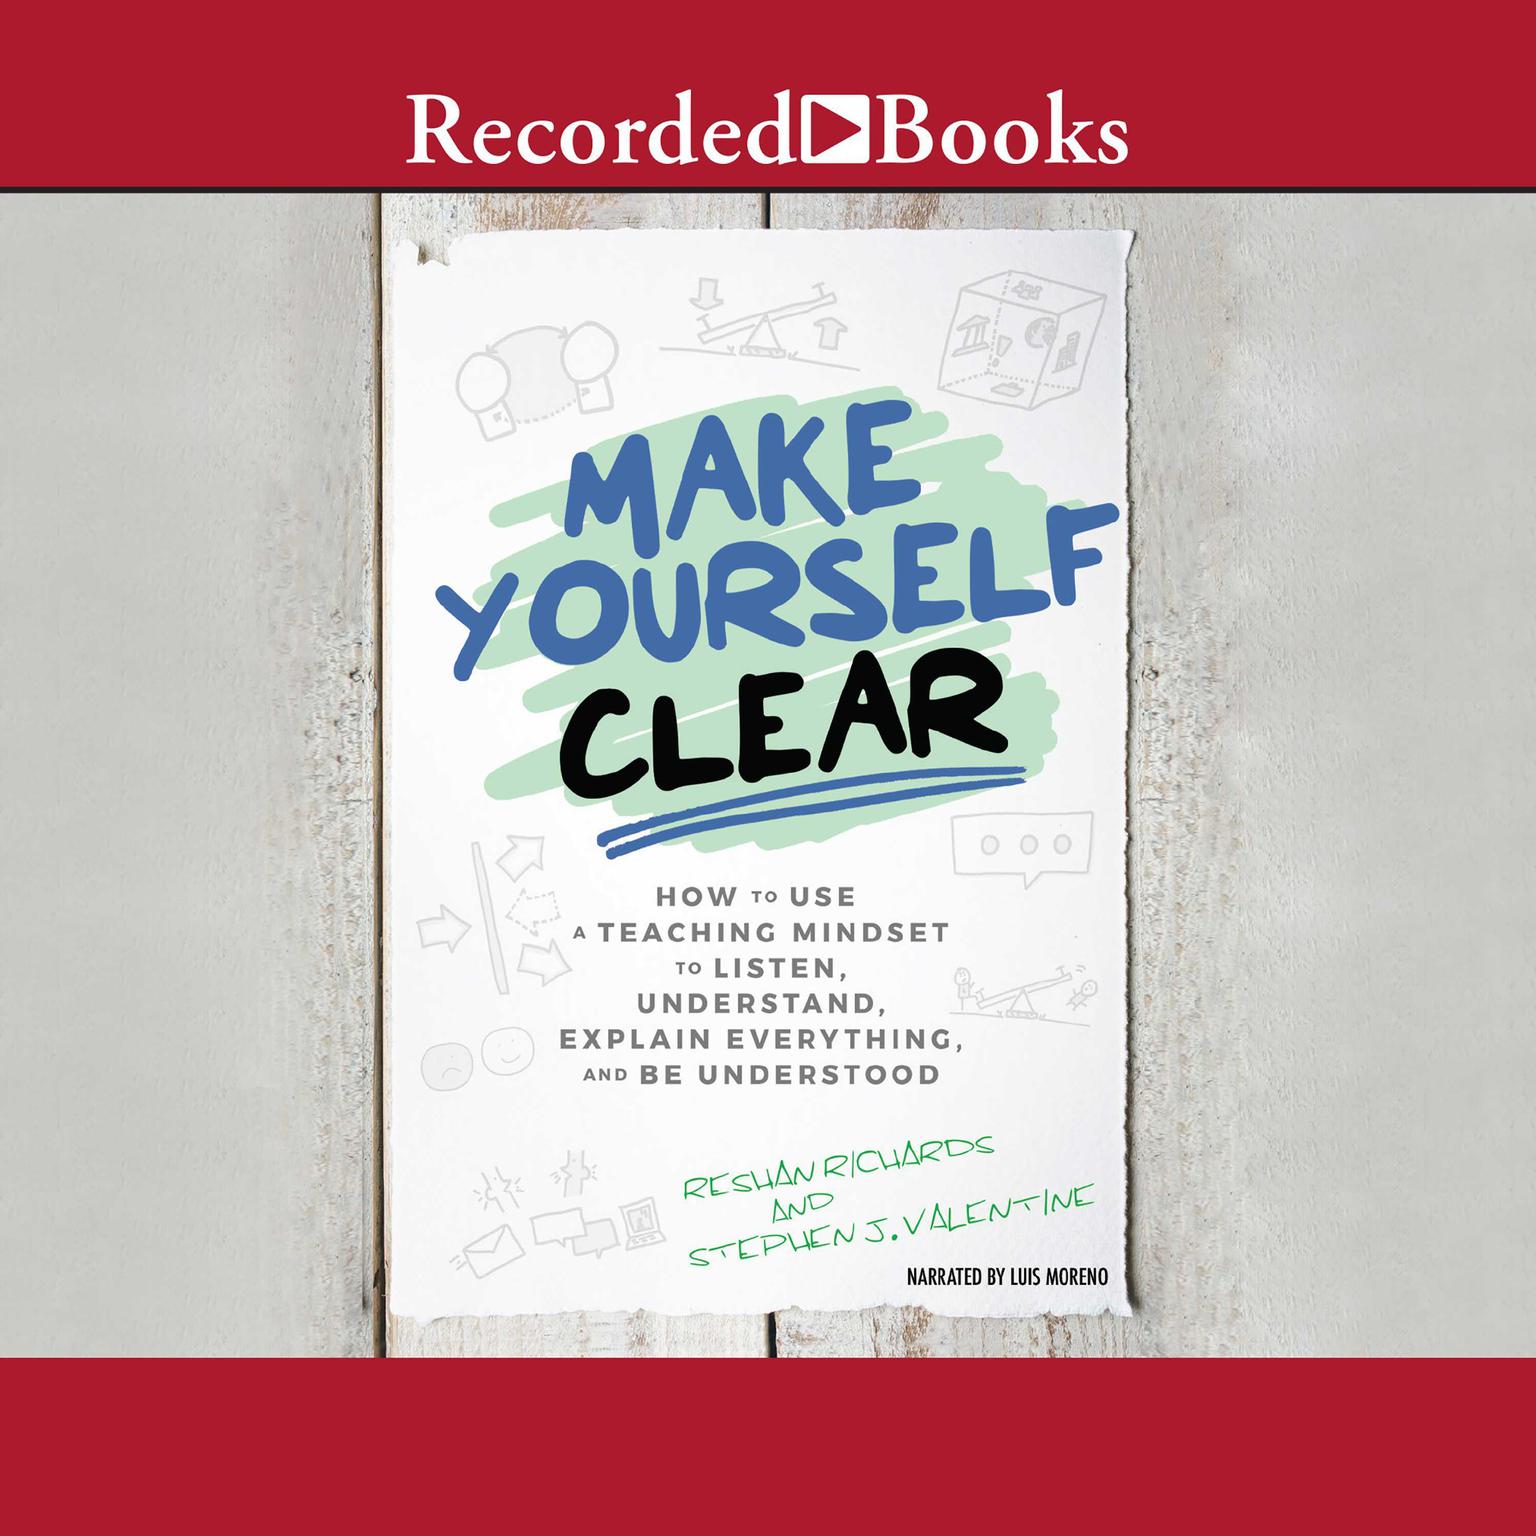 Make Yourself Clear: How to Use a Teaching Mindset to Listen, Understand, Explain Everything, and Be Understood Audiobook, by Reshan Richards